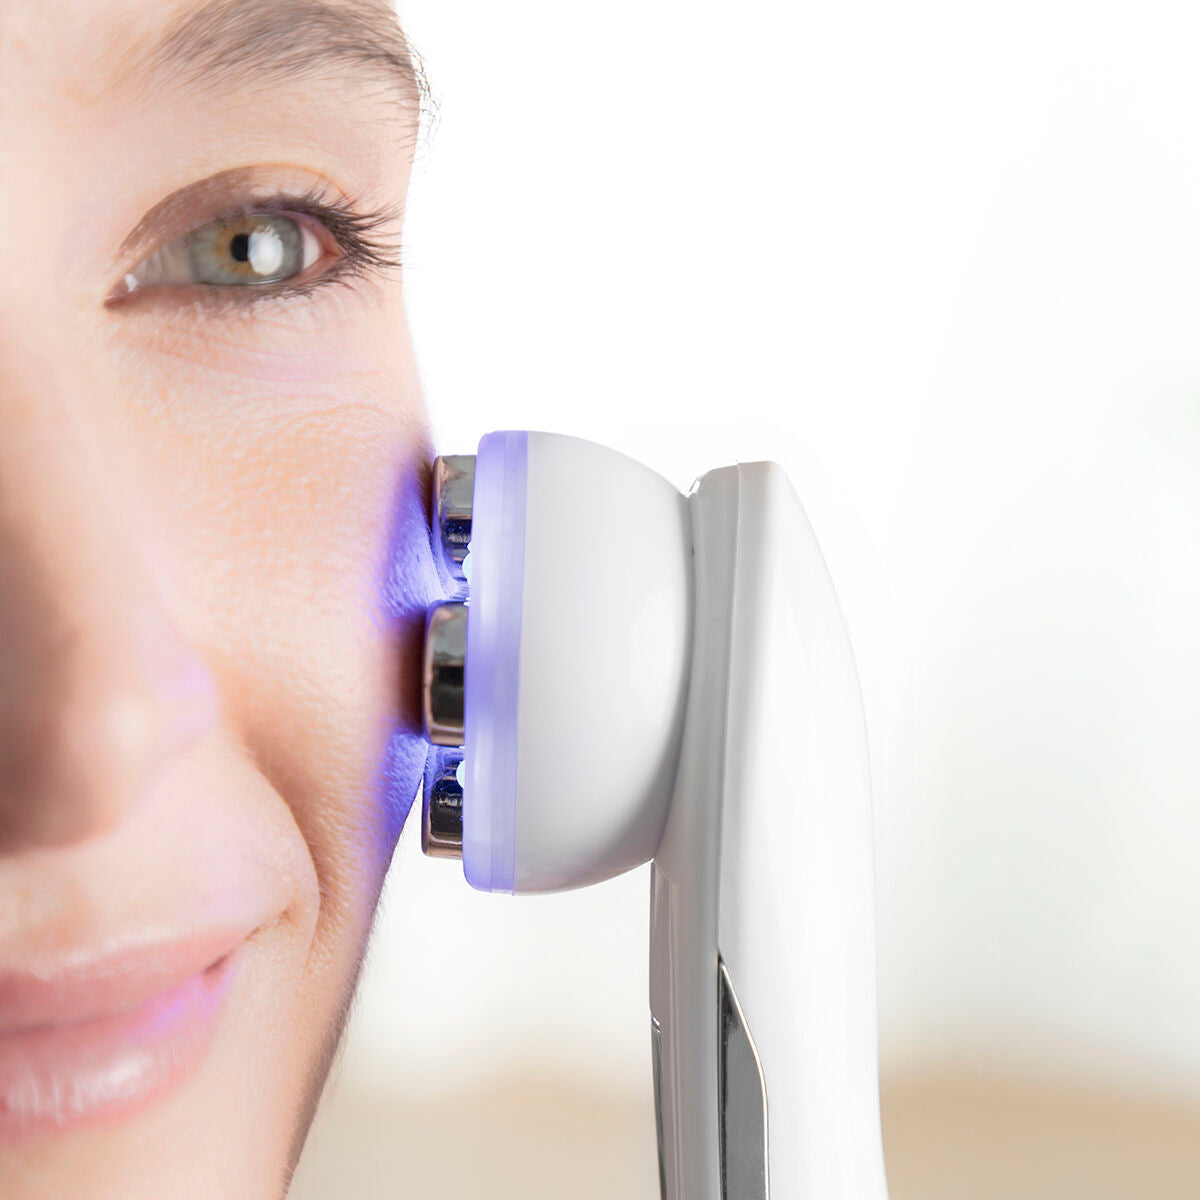 Facial Massager with Radiofrequency, Phototherapy and Electrostimulation Wace InnovaGoods